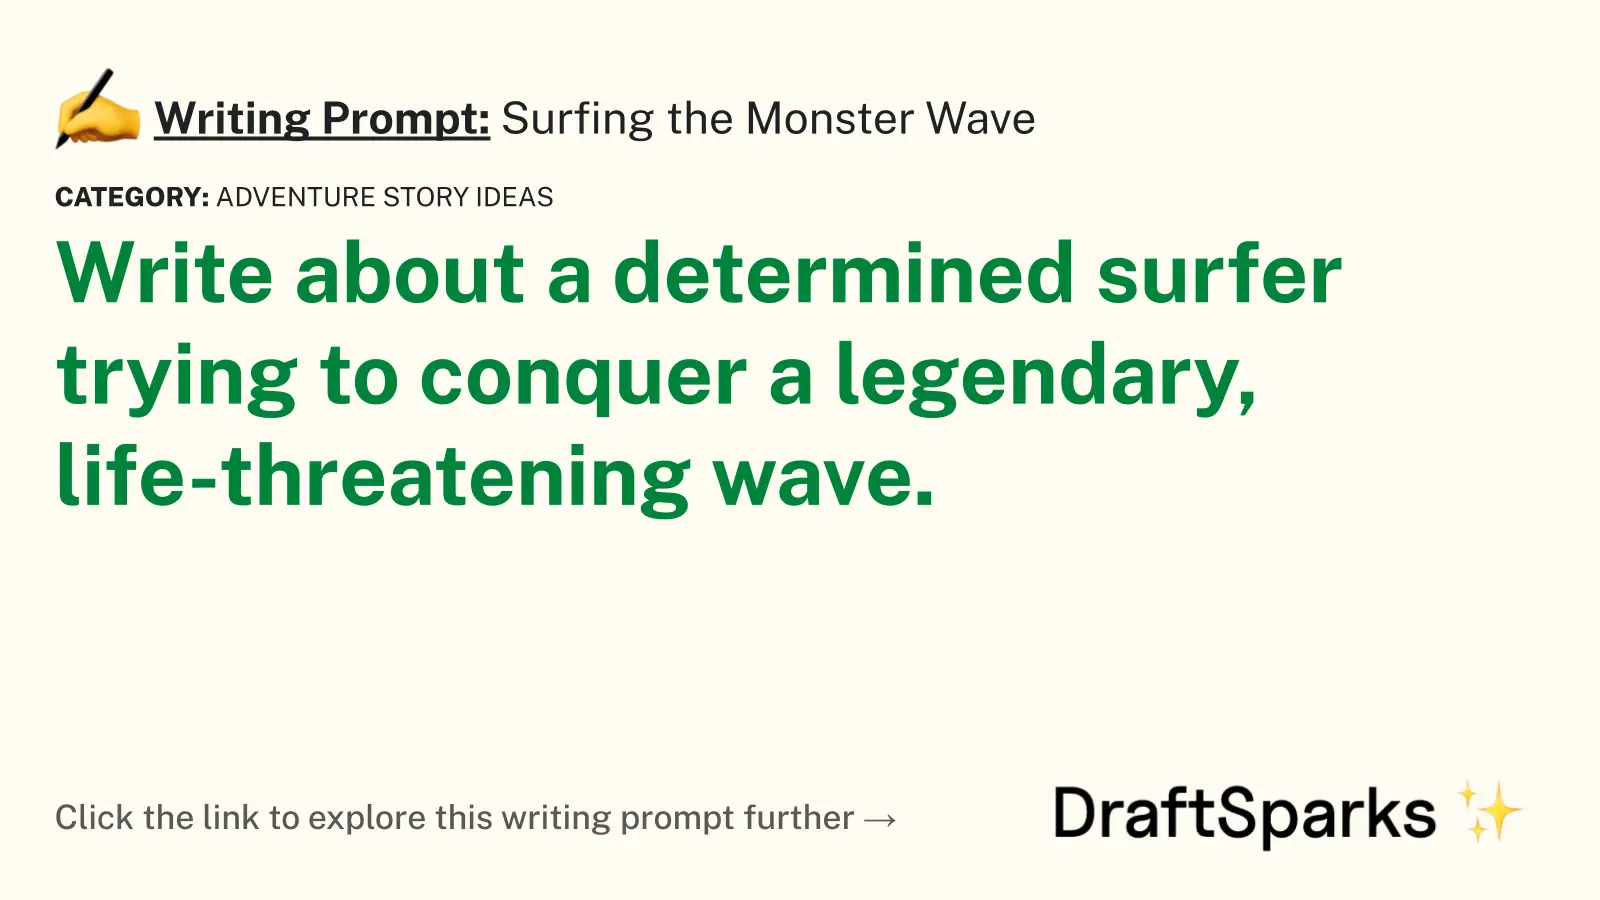 Surfing the Monster Wave